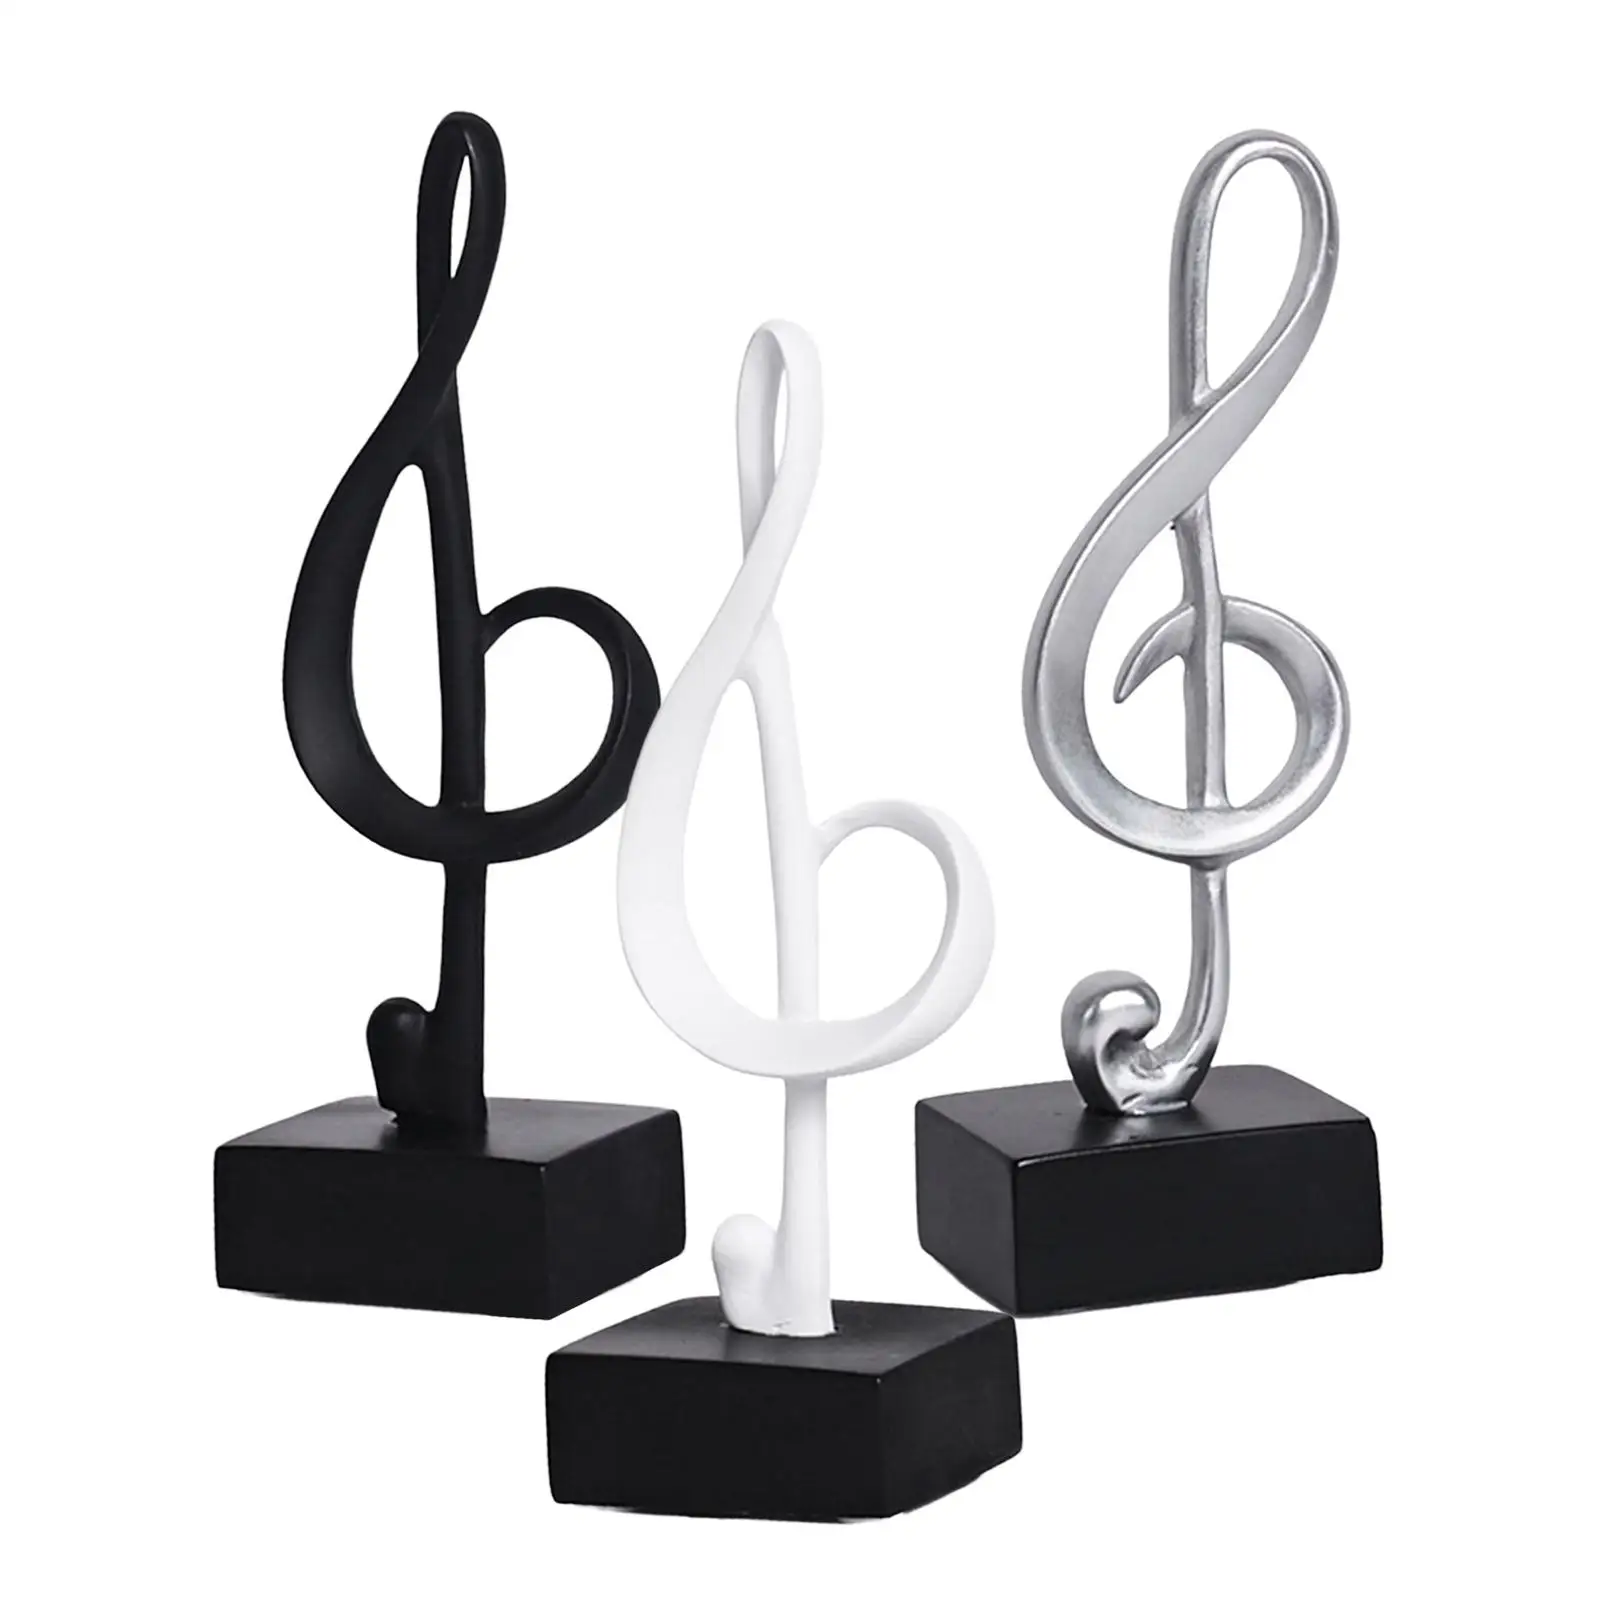 Creative music note figure resin statue sculpture artwork for living room office